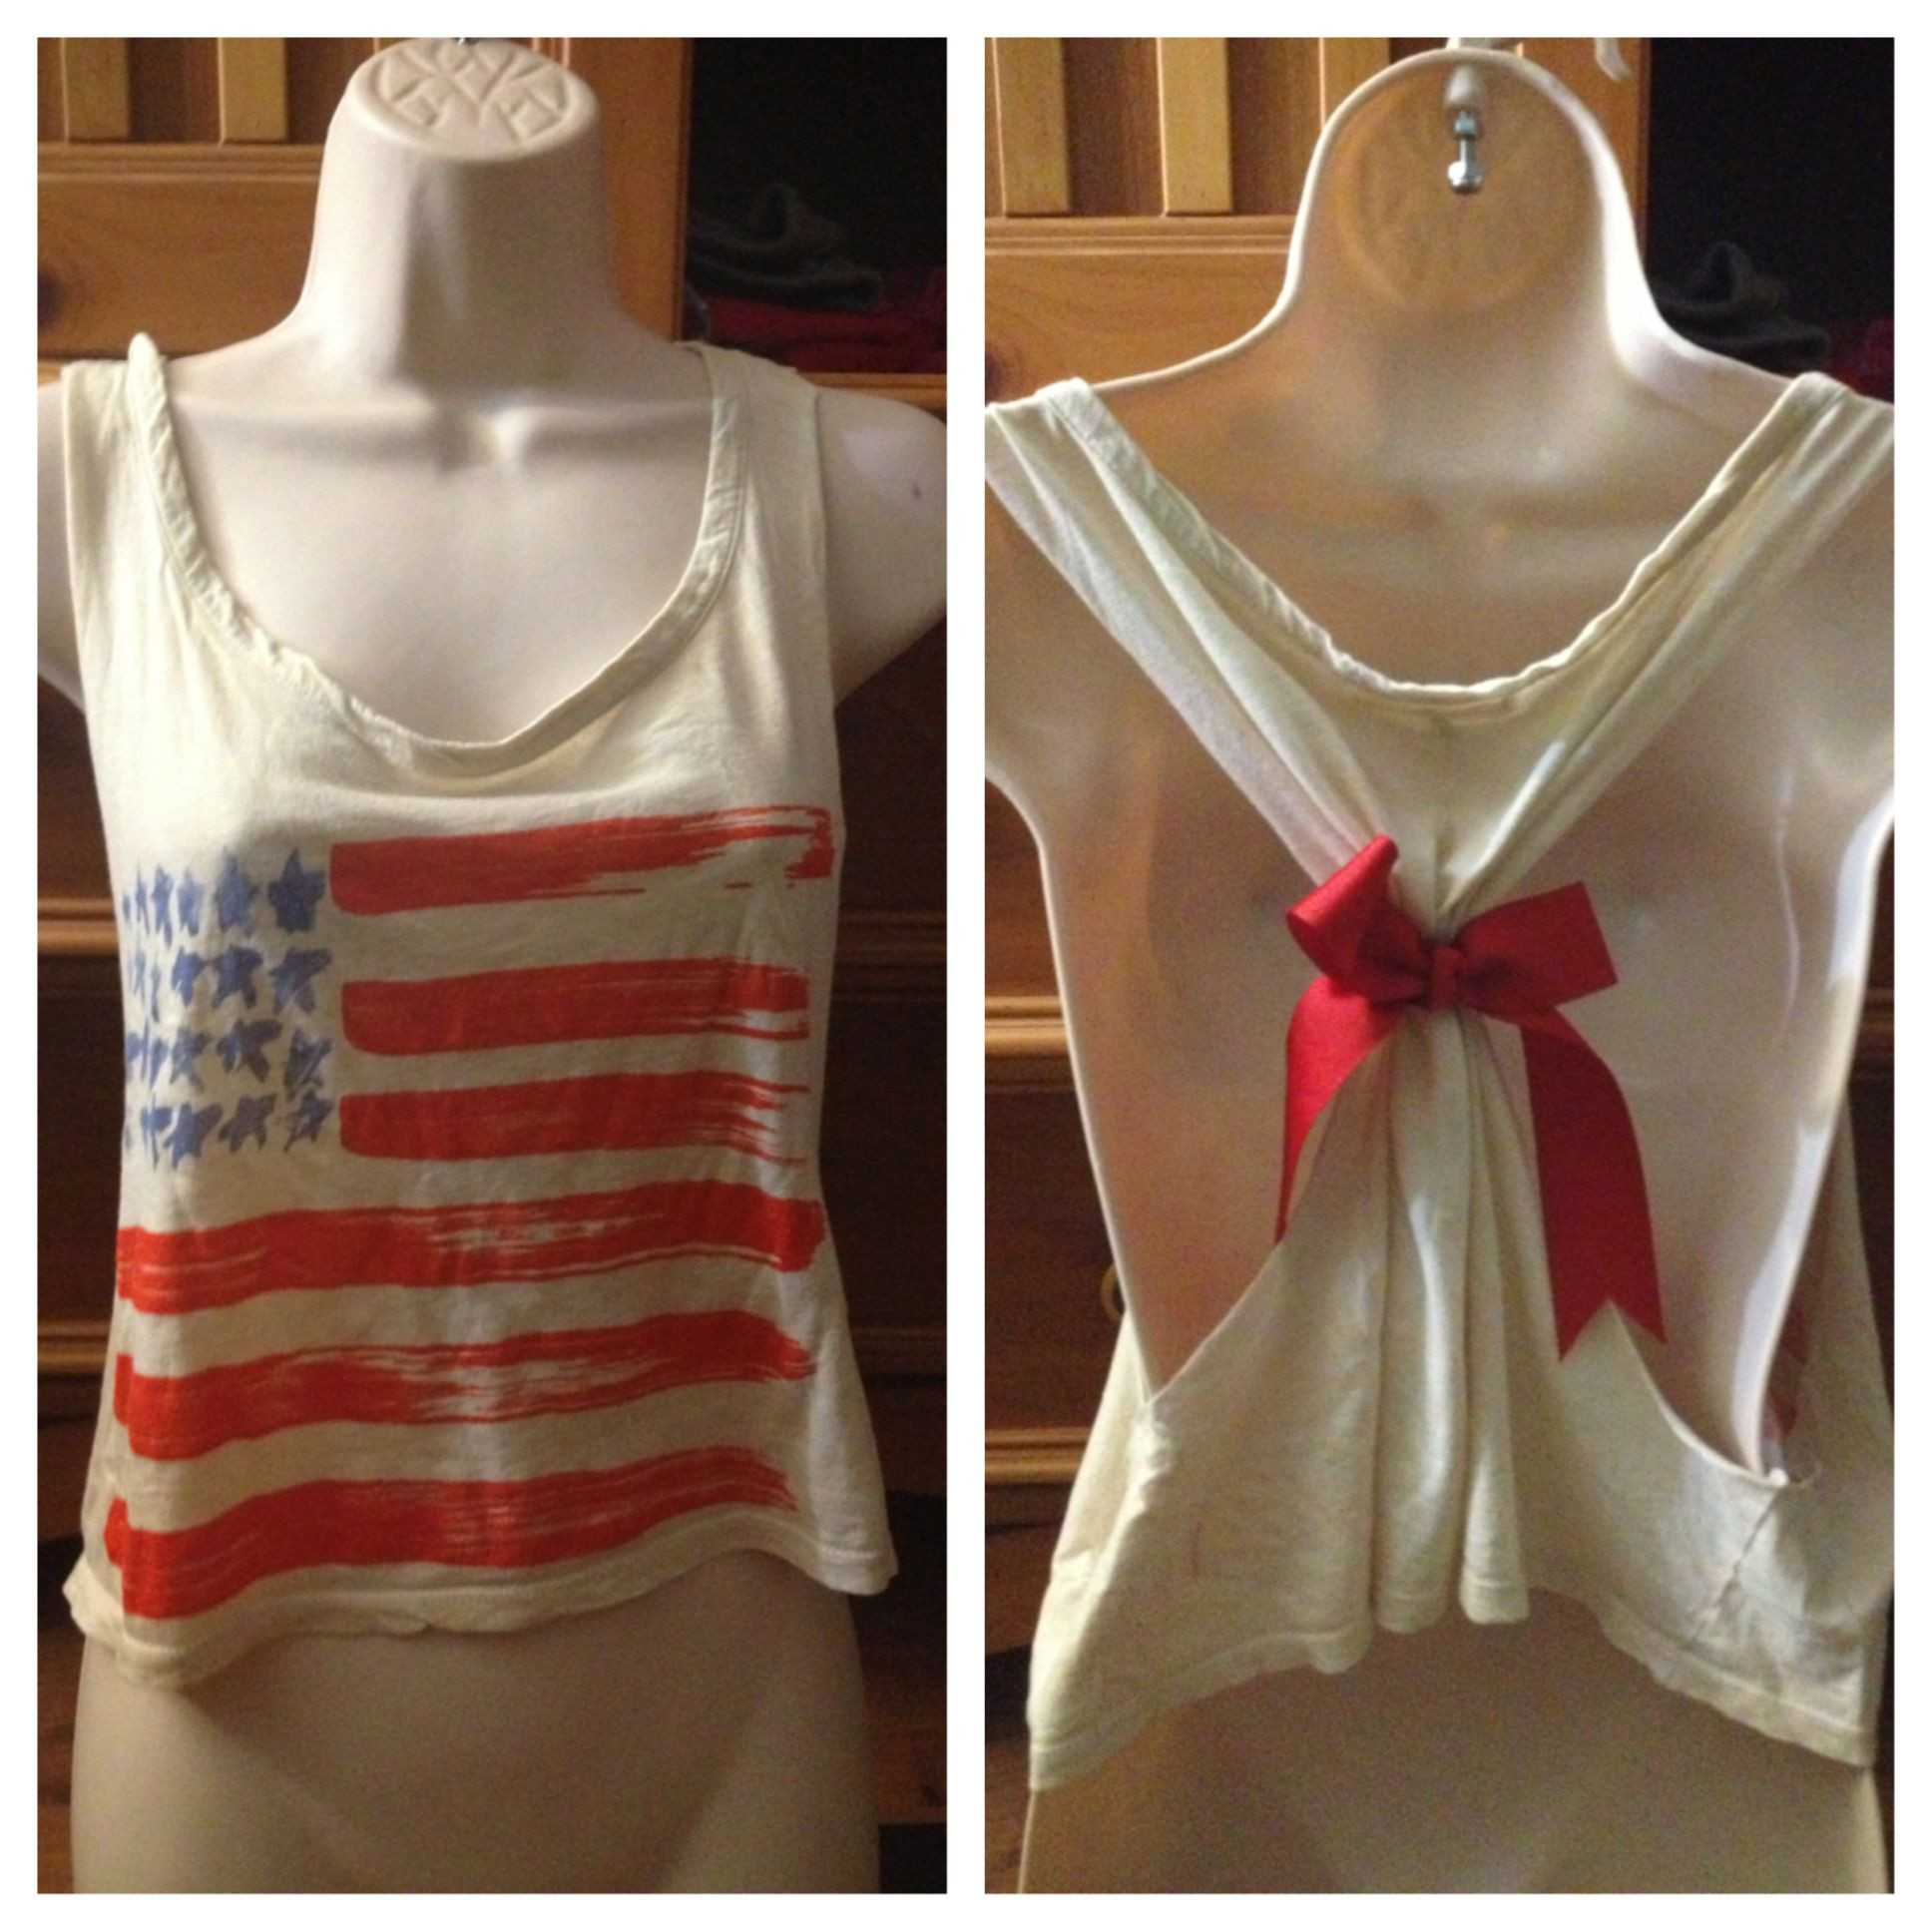 Diy Fourth Of July Outfits
 Homemade Fourth of July tank top DIY outfit I love it